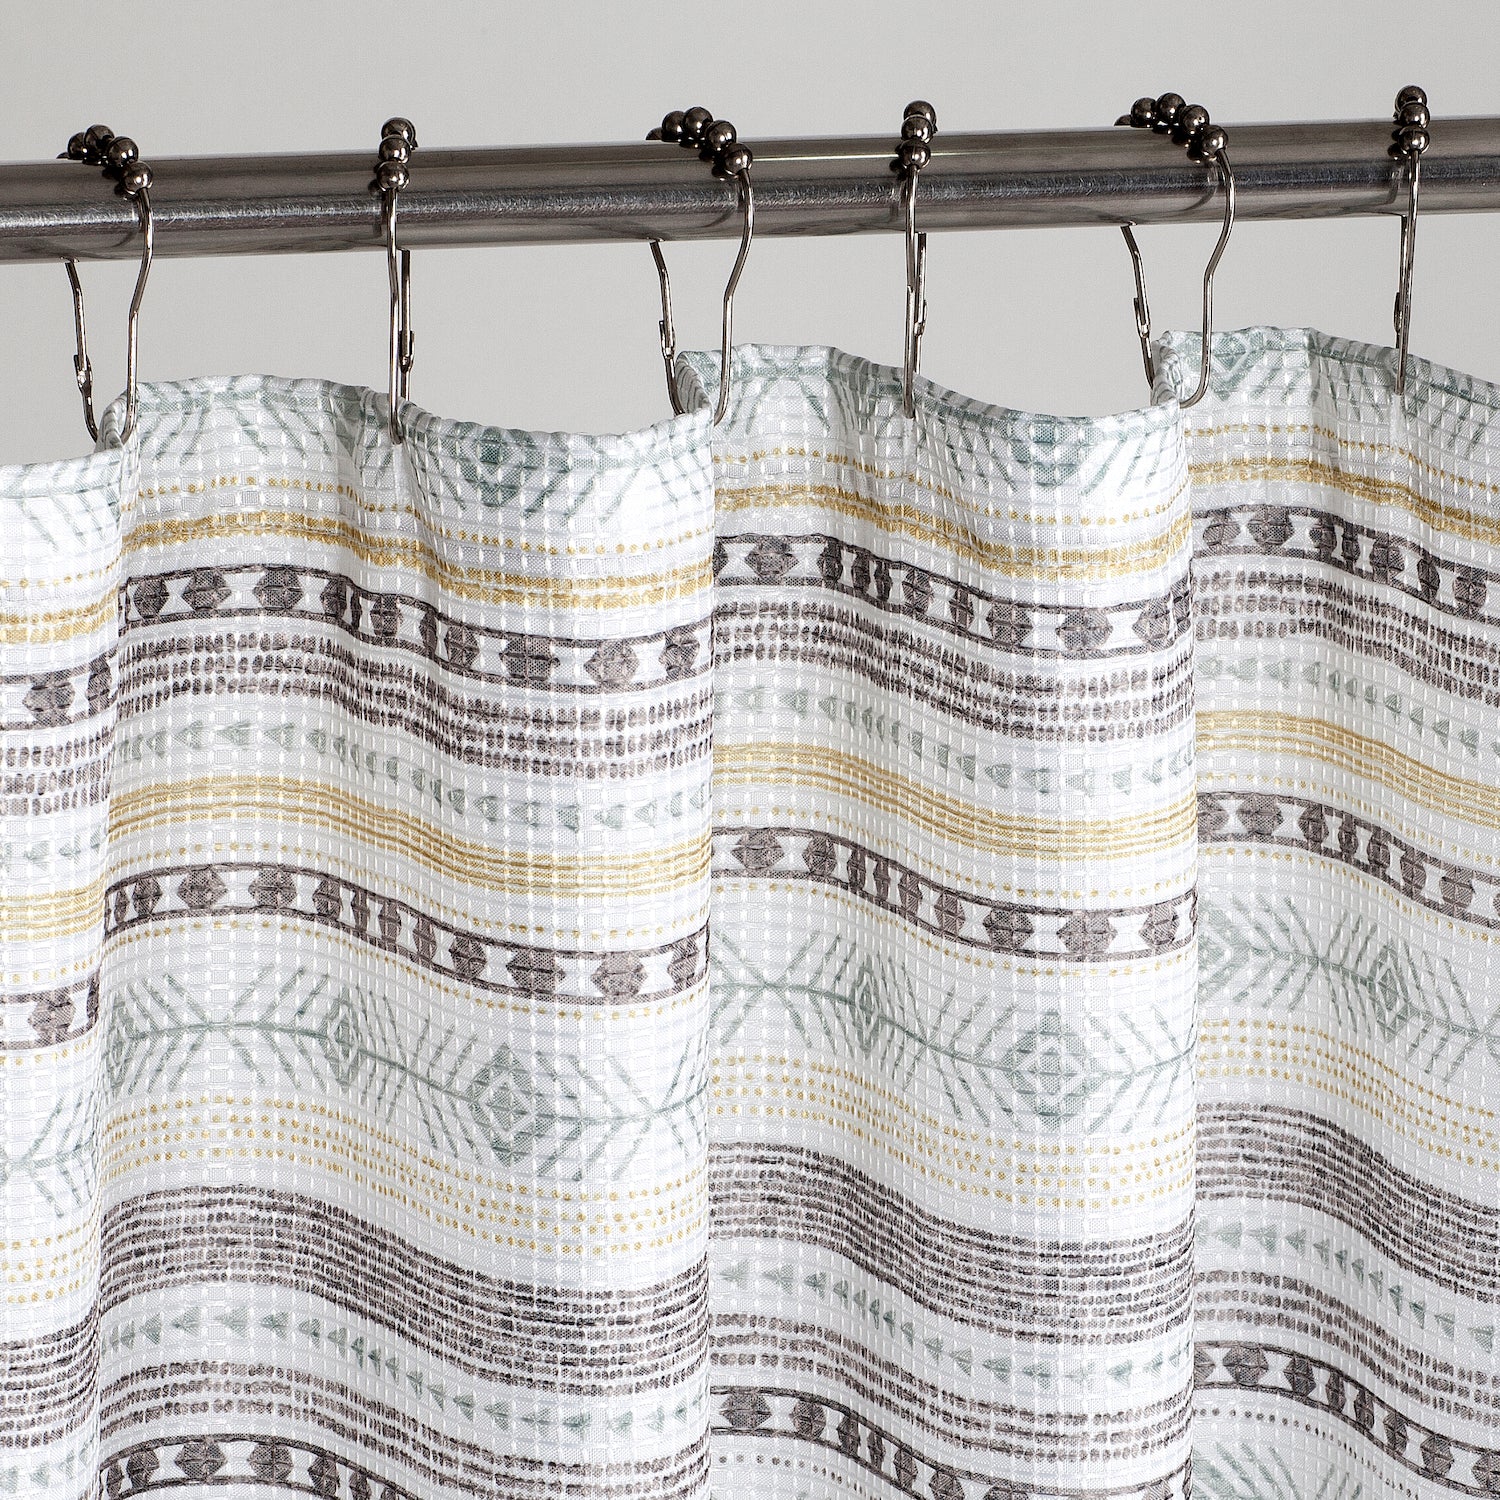 Dainty Home Printed 3D Waffle Weave Textured Aztec Designed Shower Curtain with 12 Roller Ball Hooks Included 70" x 72" in Multicolor